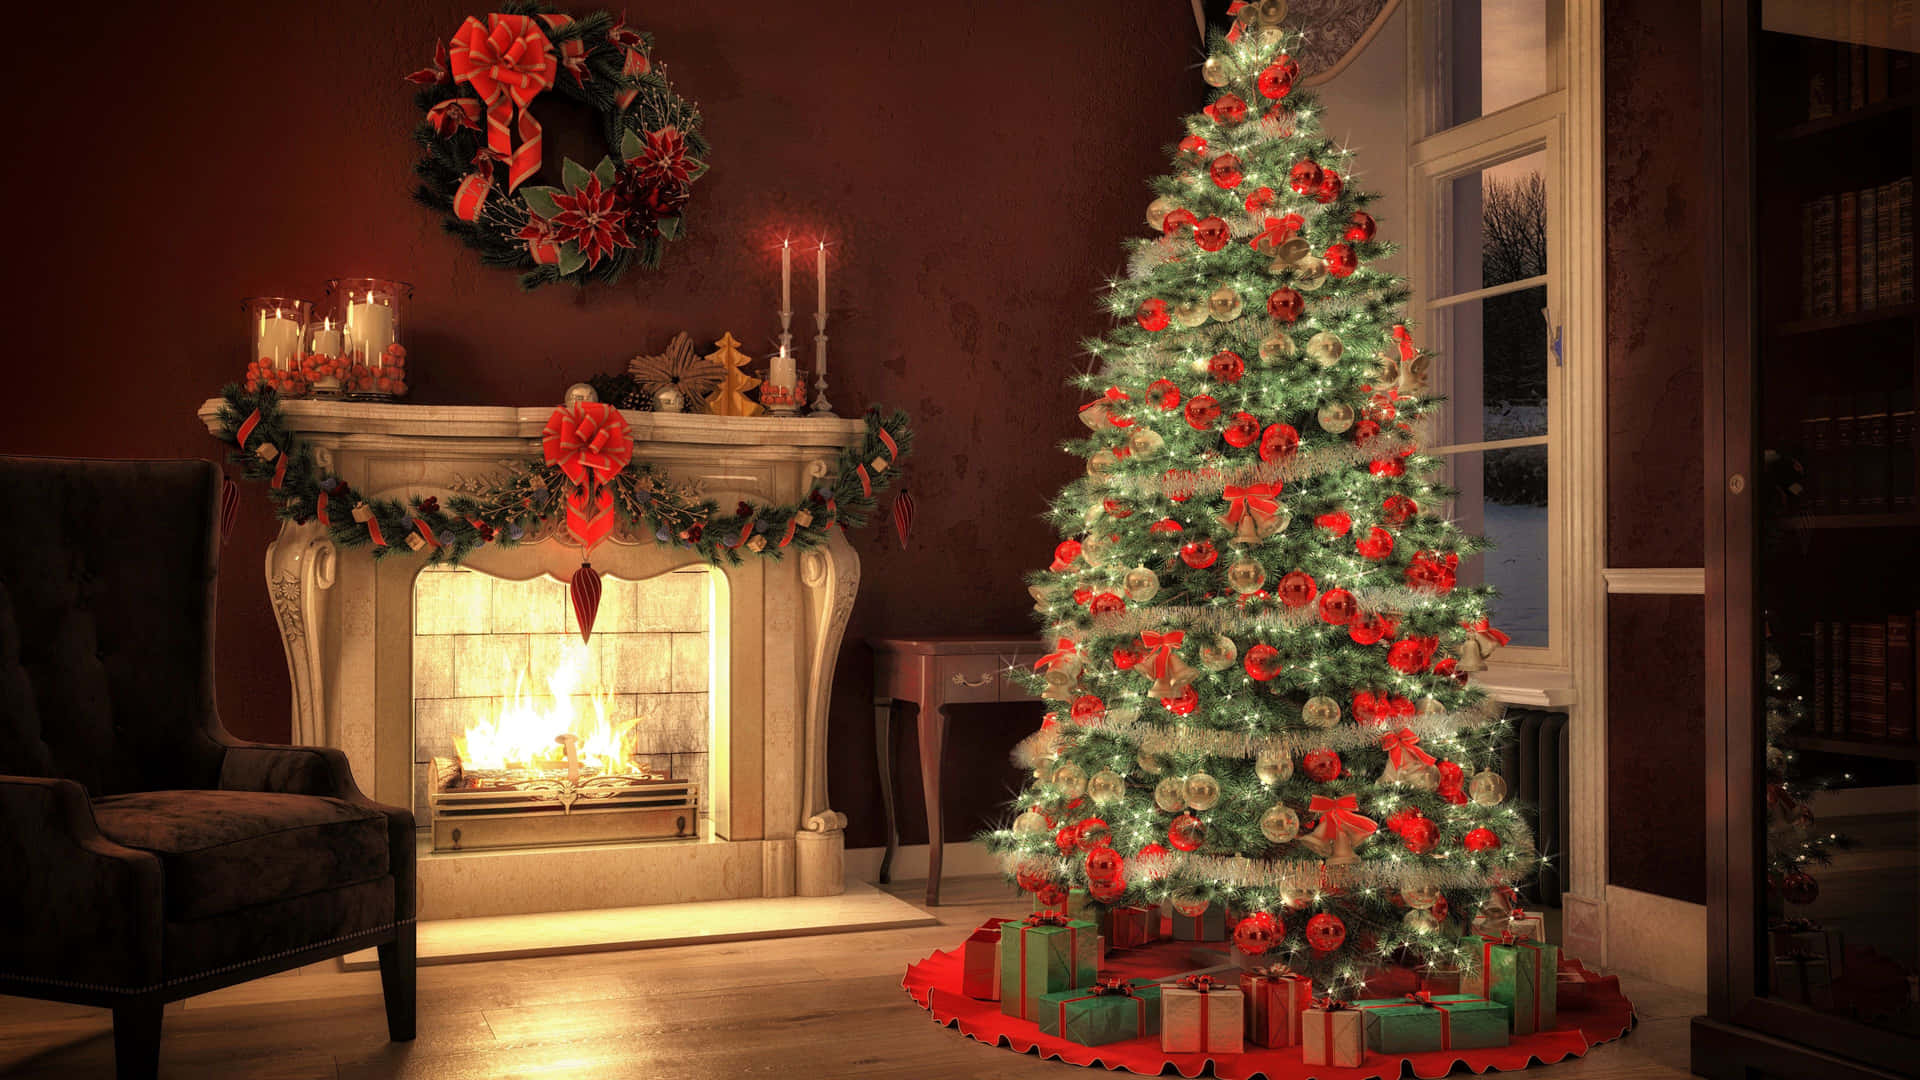 Christmas Fireplace With Red Decorations Background